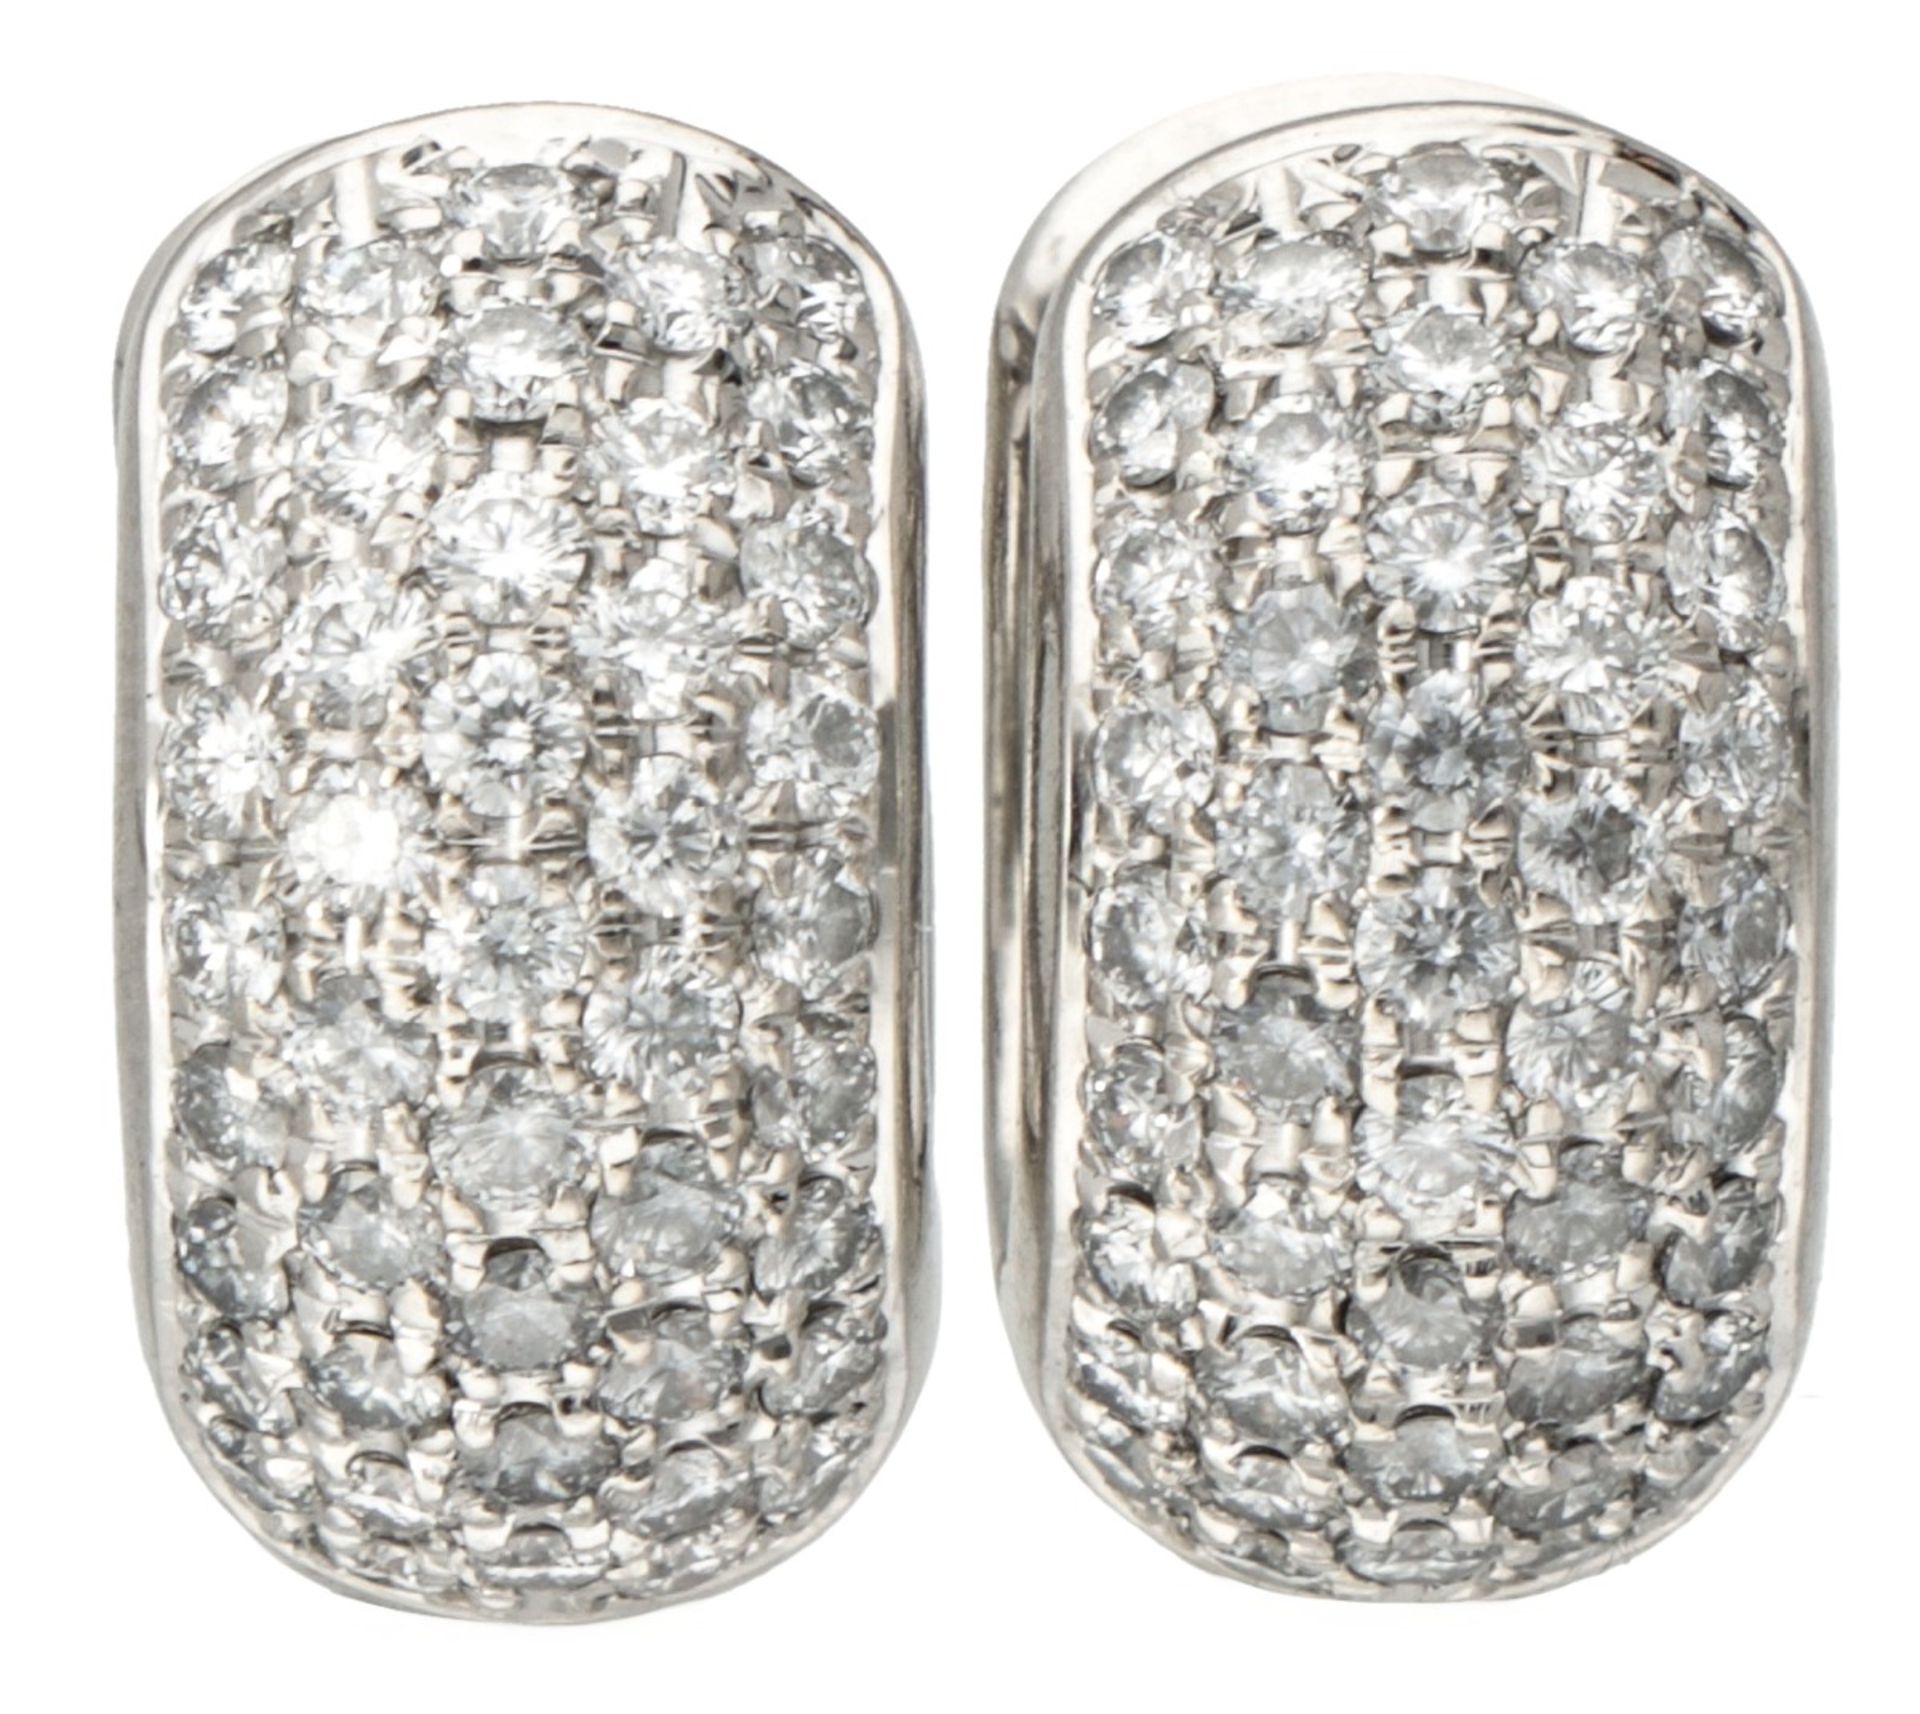 18K. White gold earrings set with approx. 0.90 ct. diamond. - Image 2 of 3